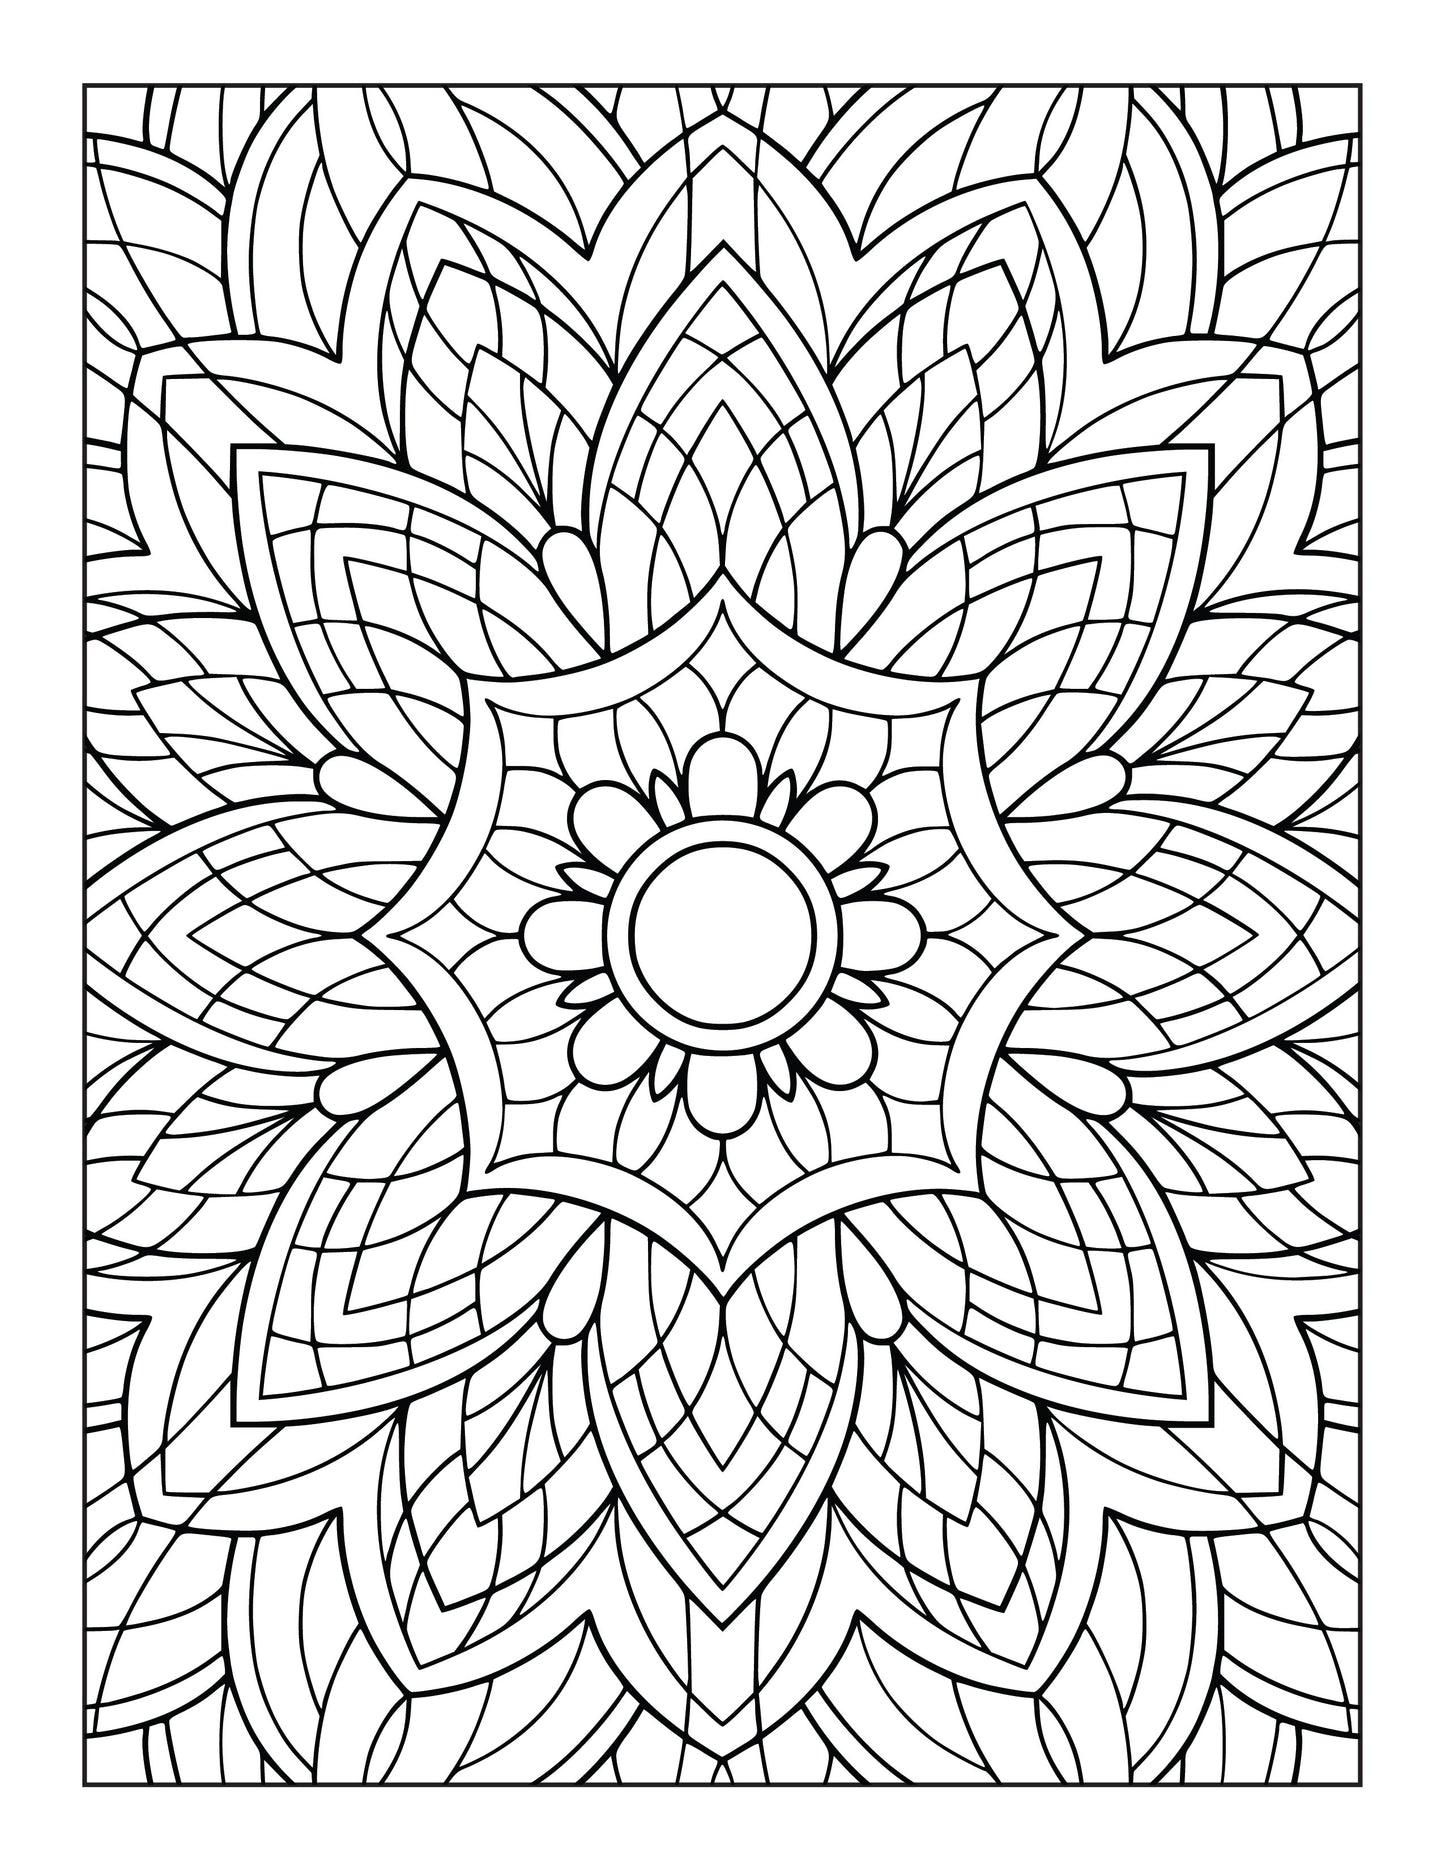 60 Free Mandala Adult Coloring Pages Printable PDF Instant Download